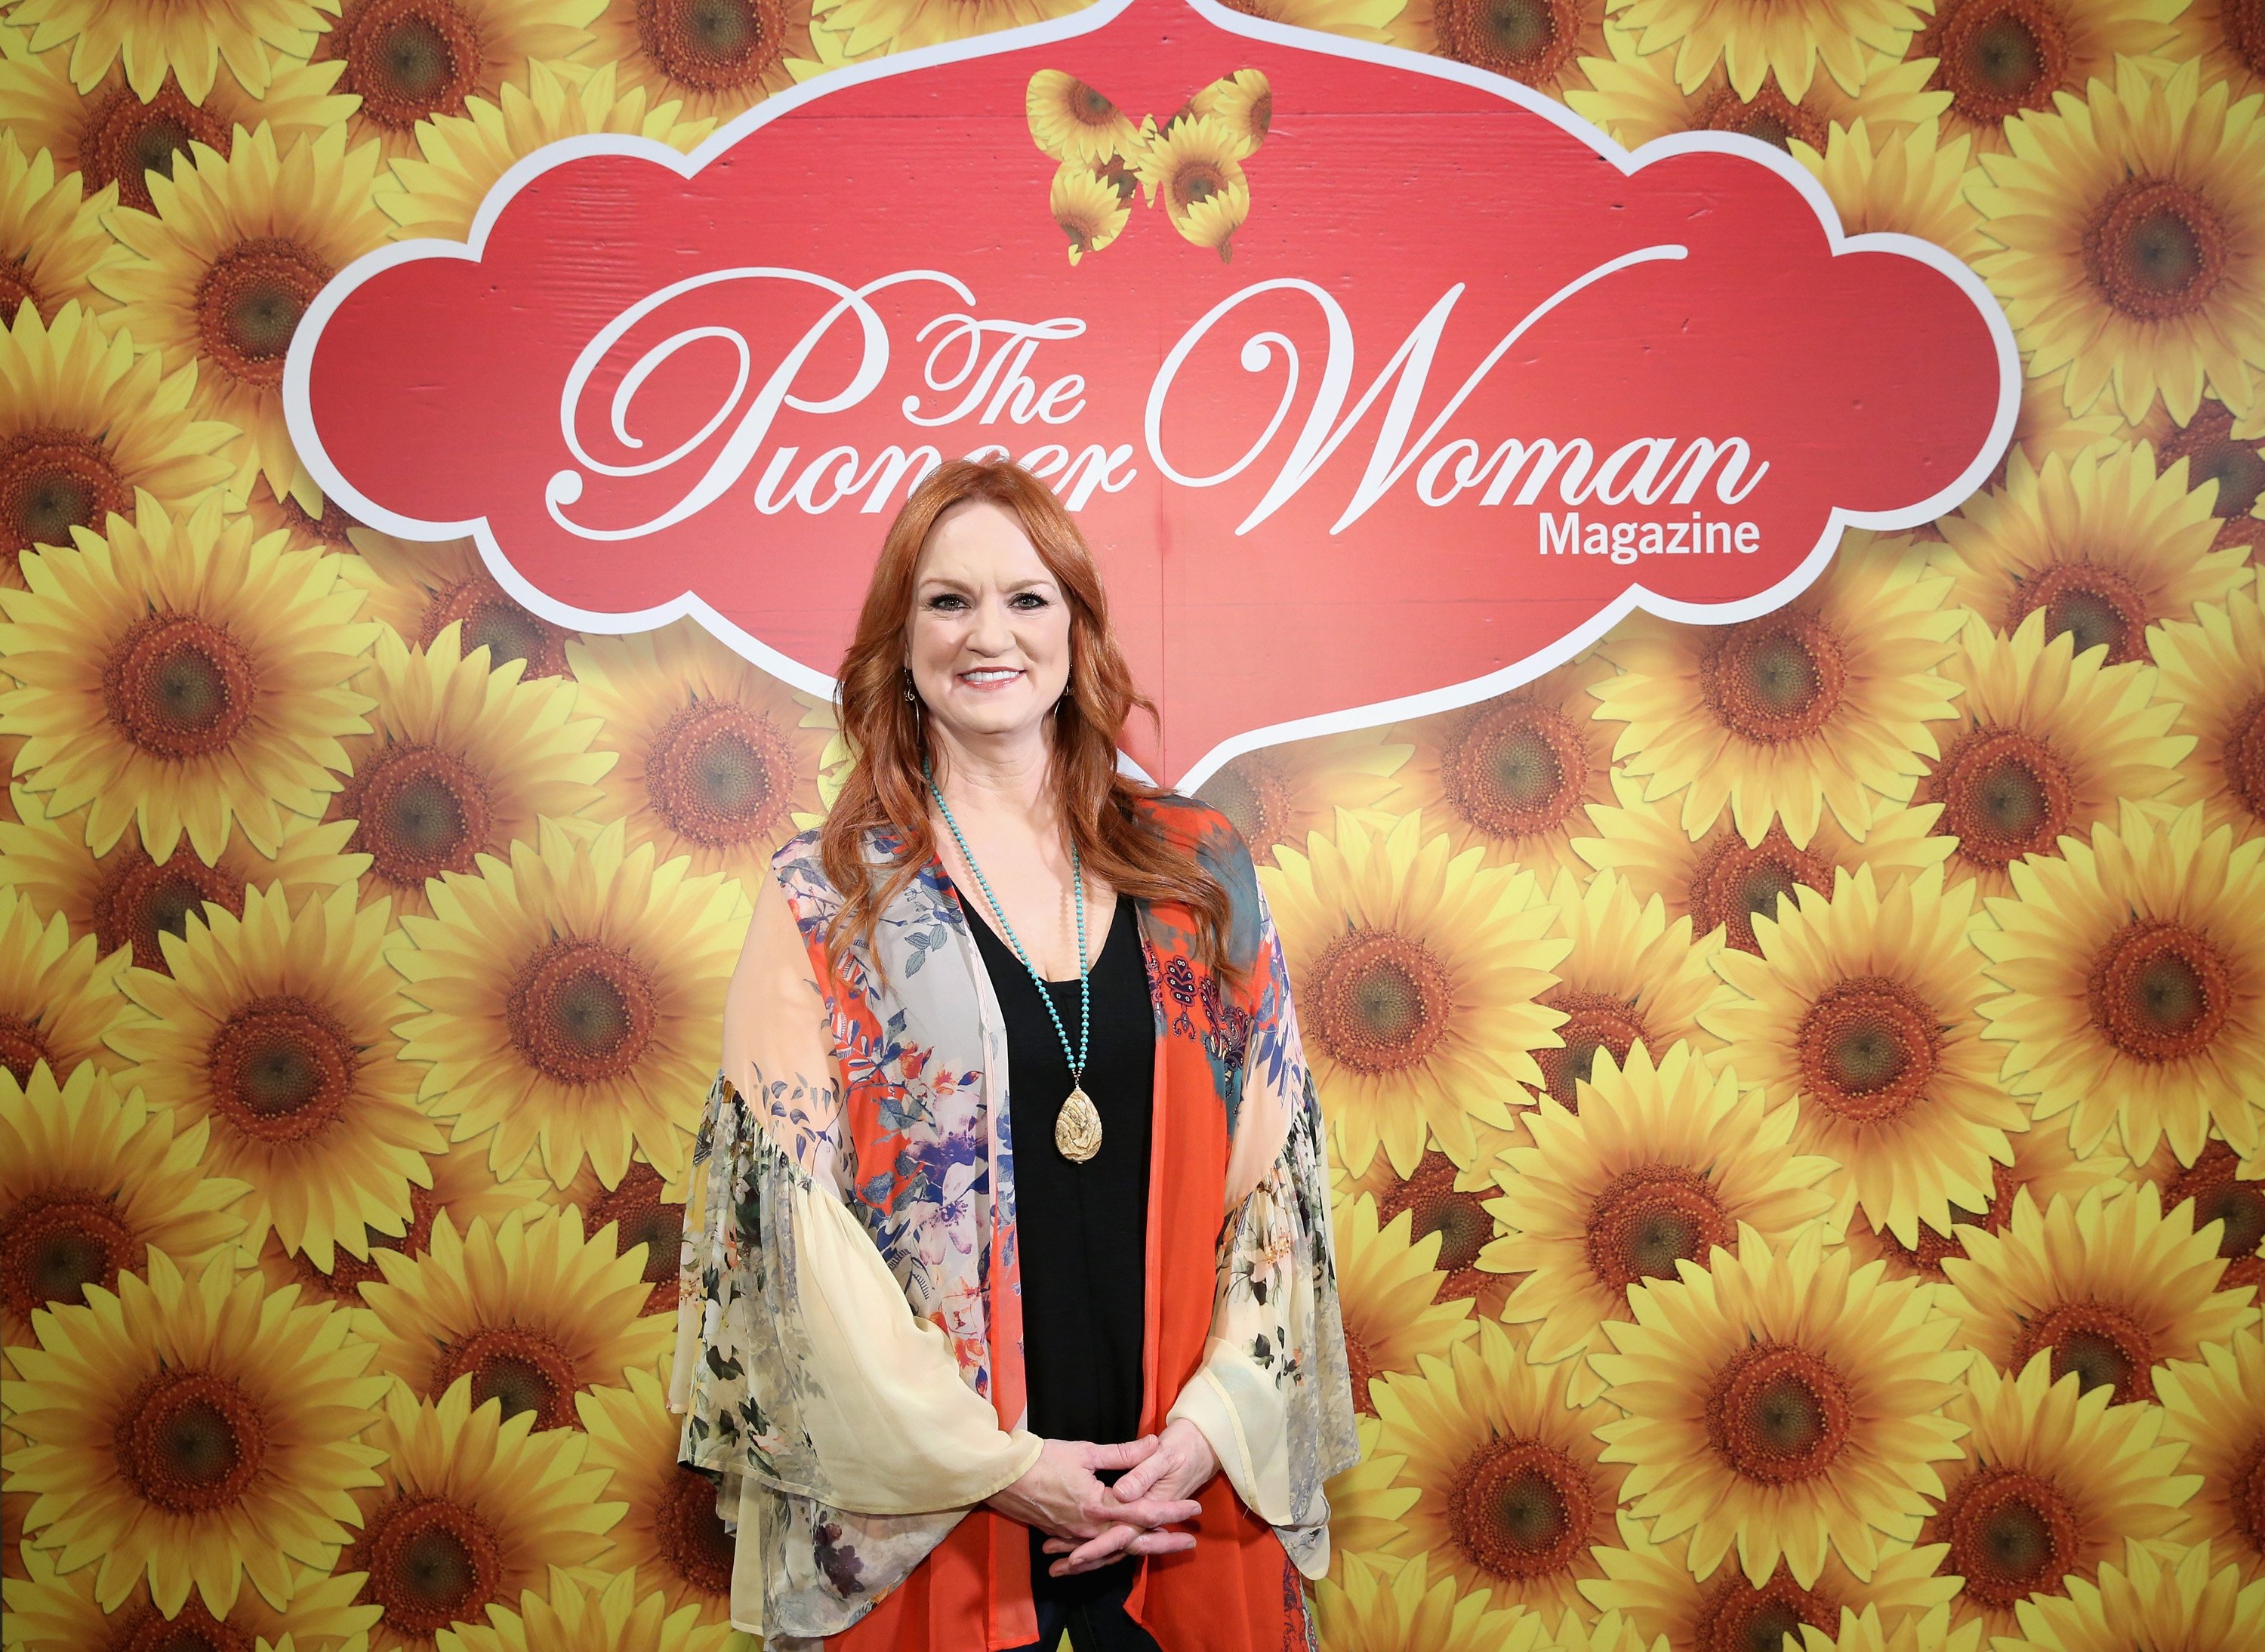 Ree Drummond poses and smiles wearing a bright shirt in front of a floral wall